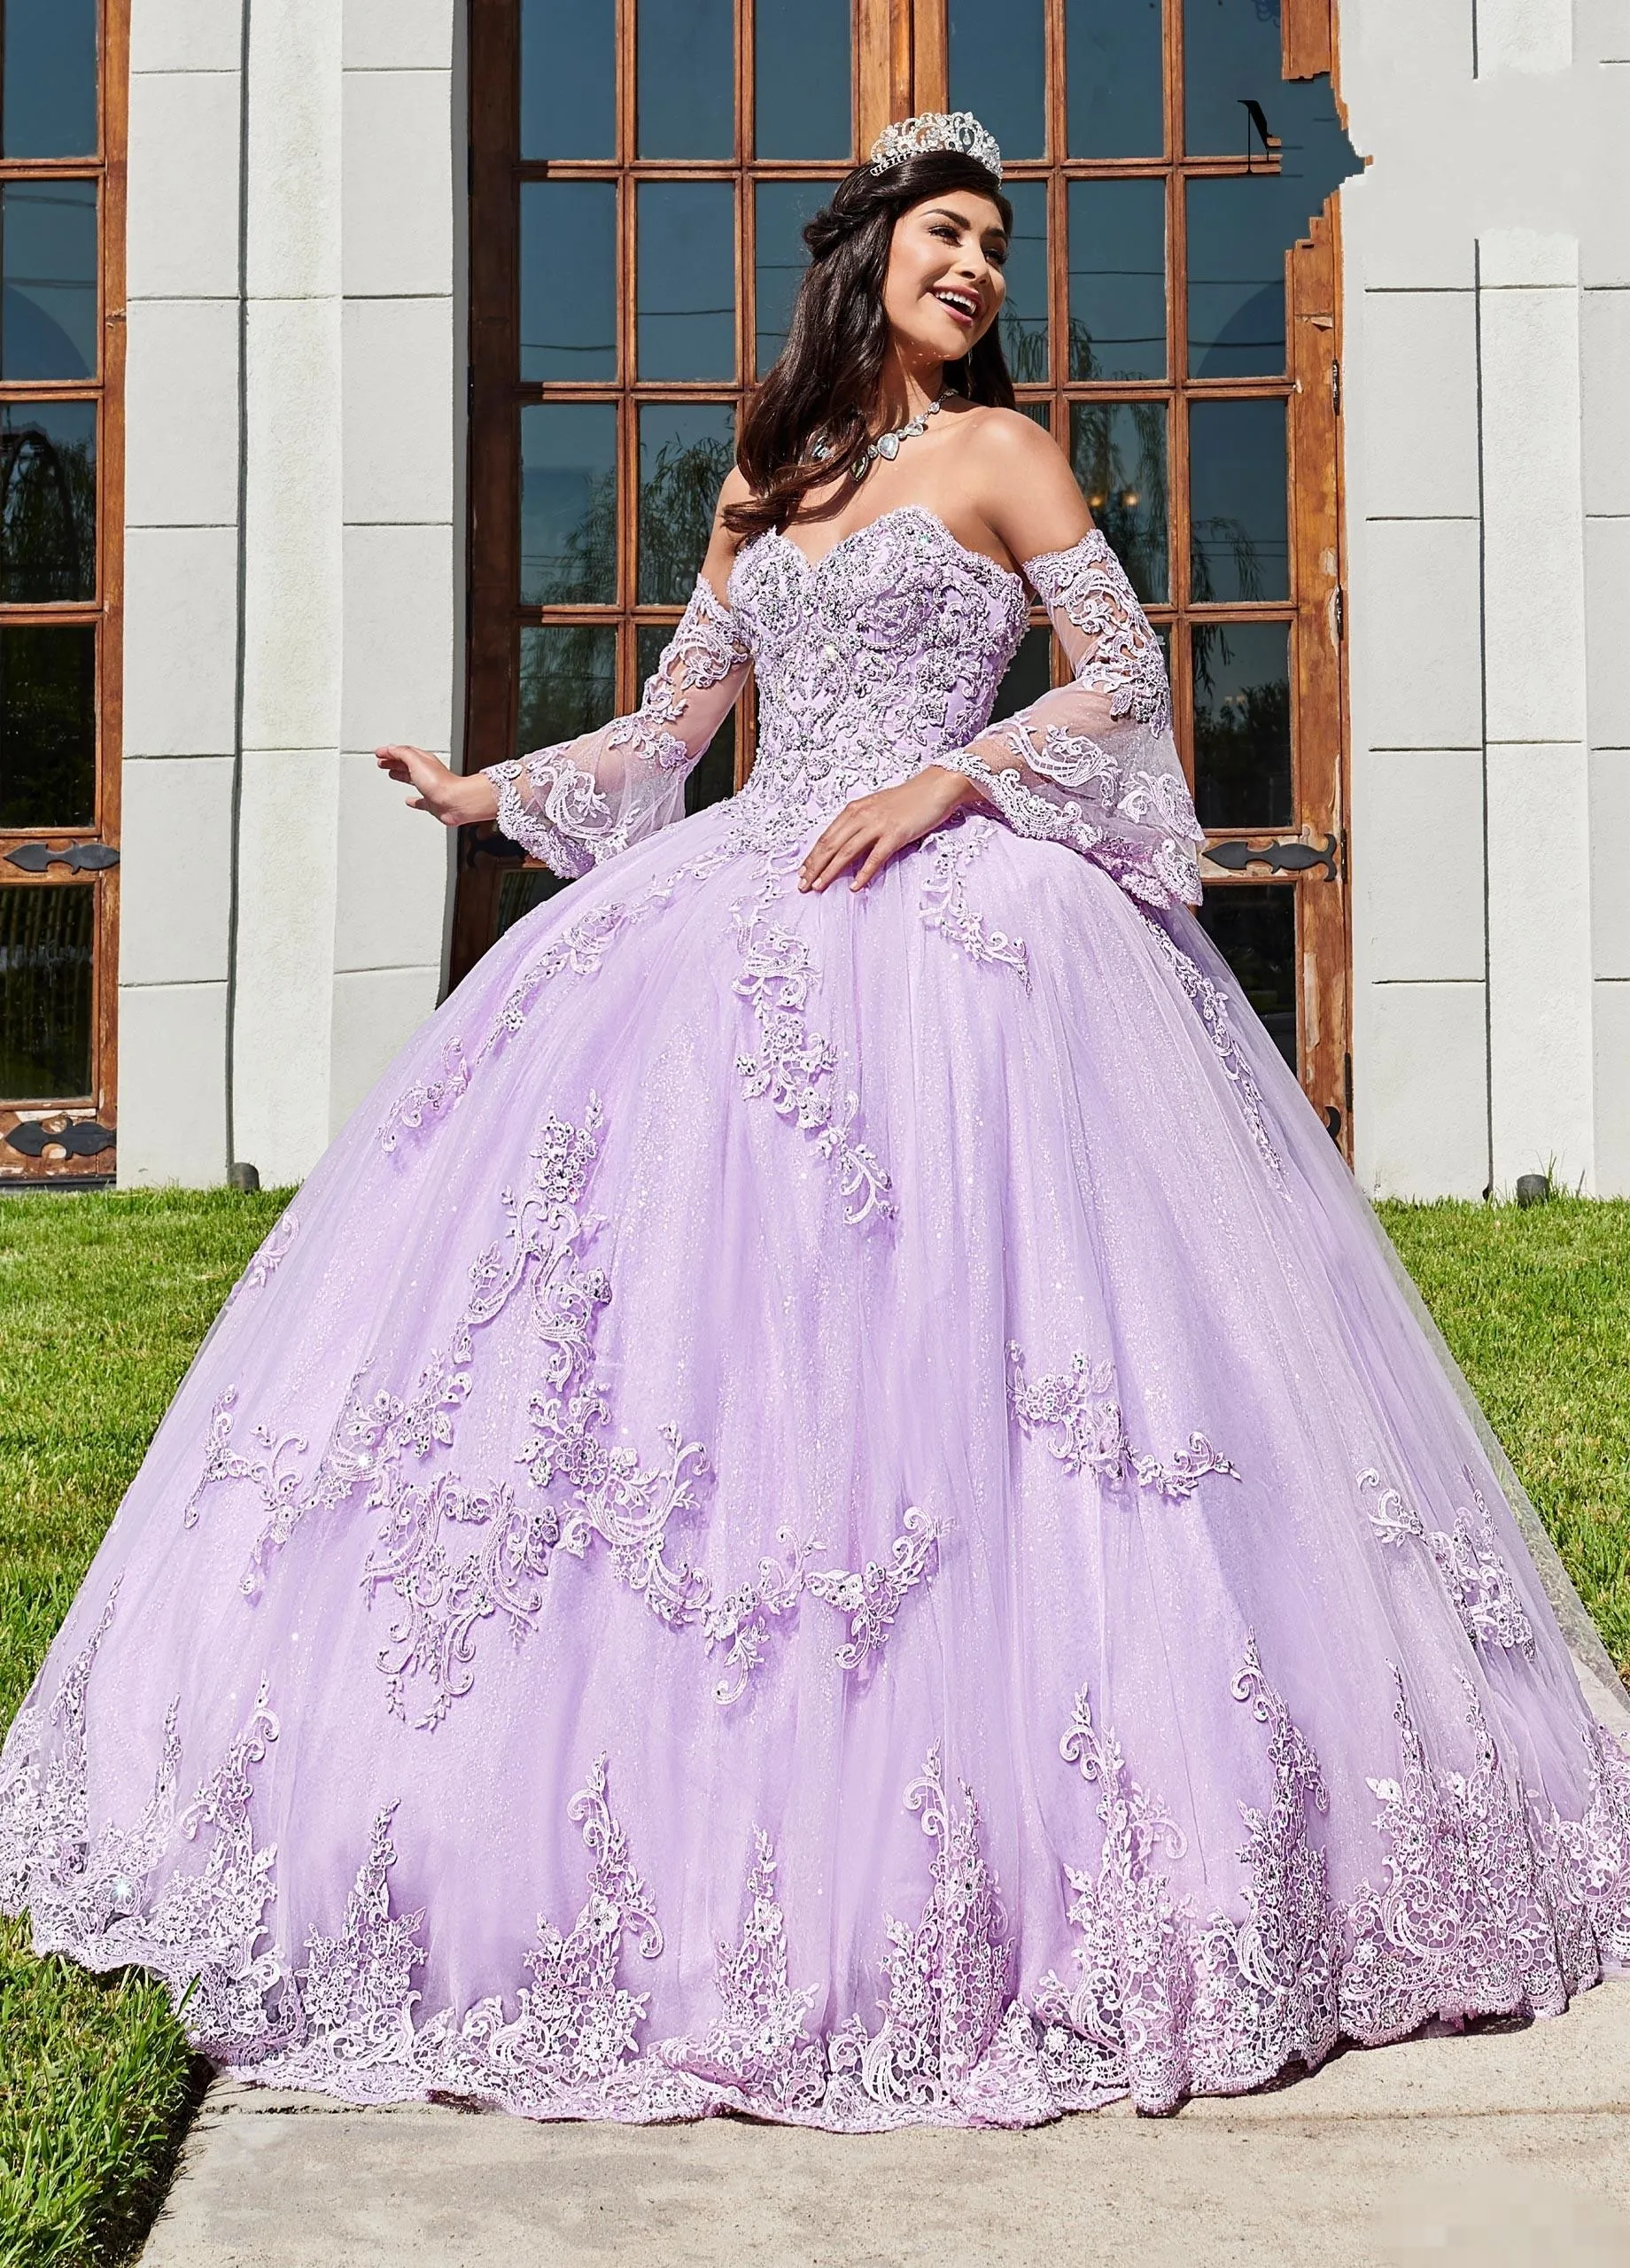 2020 New Lilac Quinceanera Dresses Sweetheart Lace Applique Corset Back Tulle Satin Pageant Long Juliet Sleeves Sweet 16 Party Bal242W